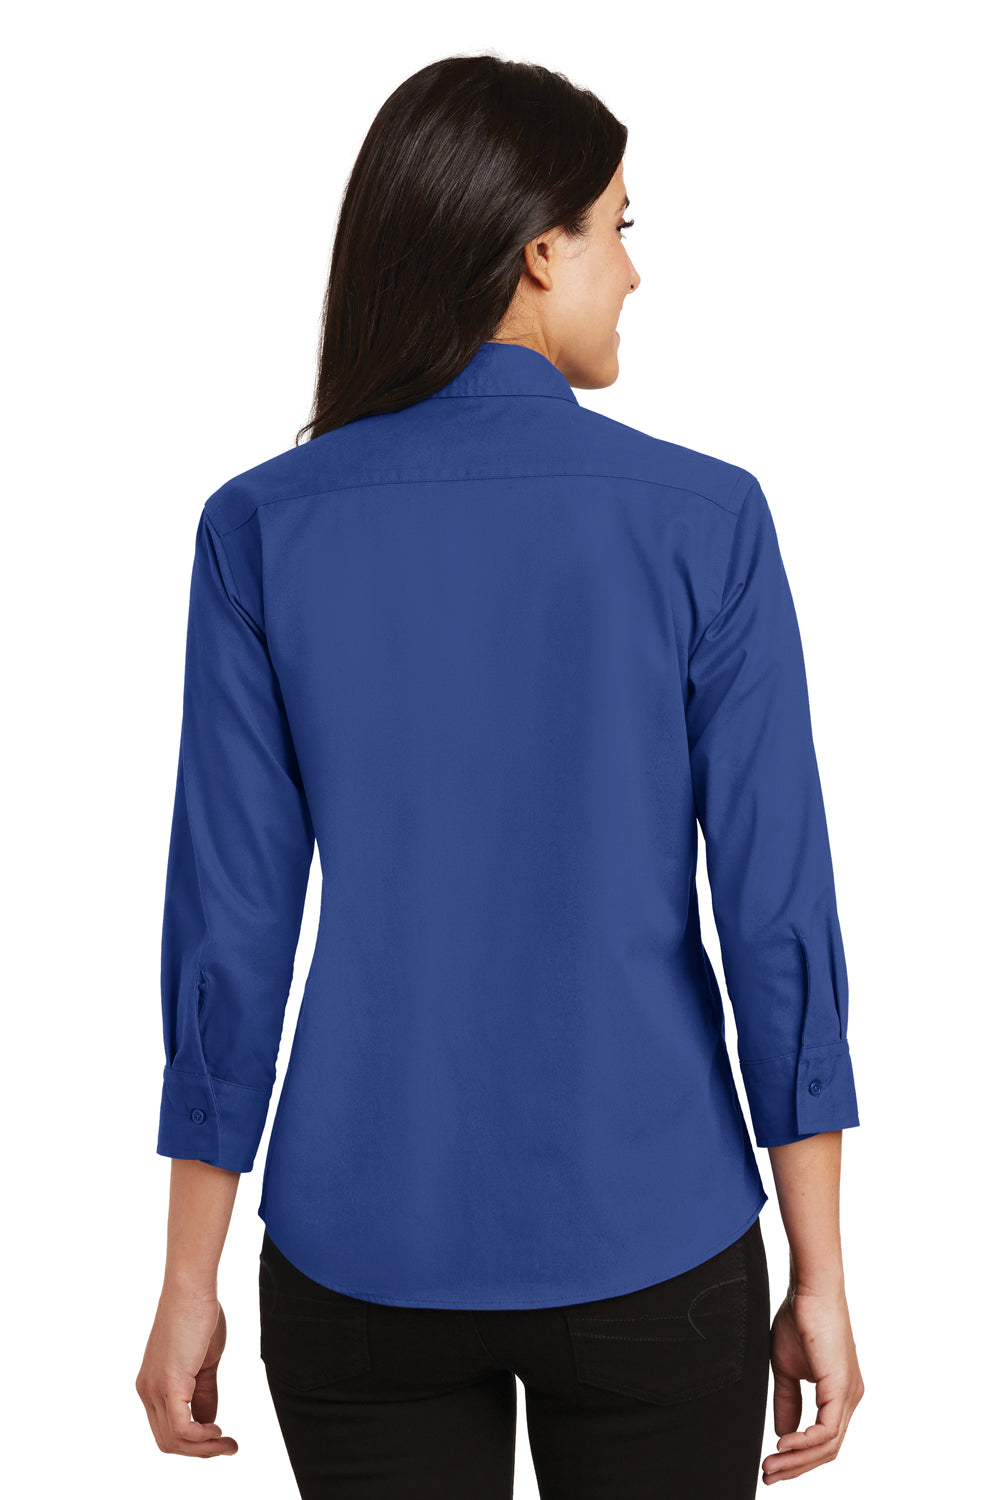 Port Authority L612 Womens Easy Care Wrinkle Resistant 3/4 Sleeve Button Down Shirt Royal Blue Back